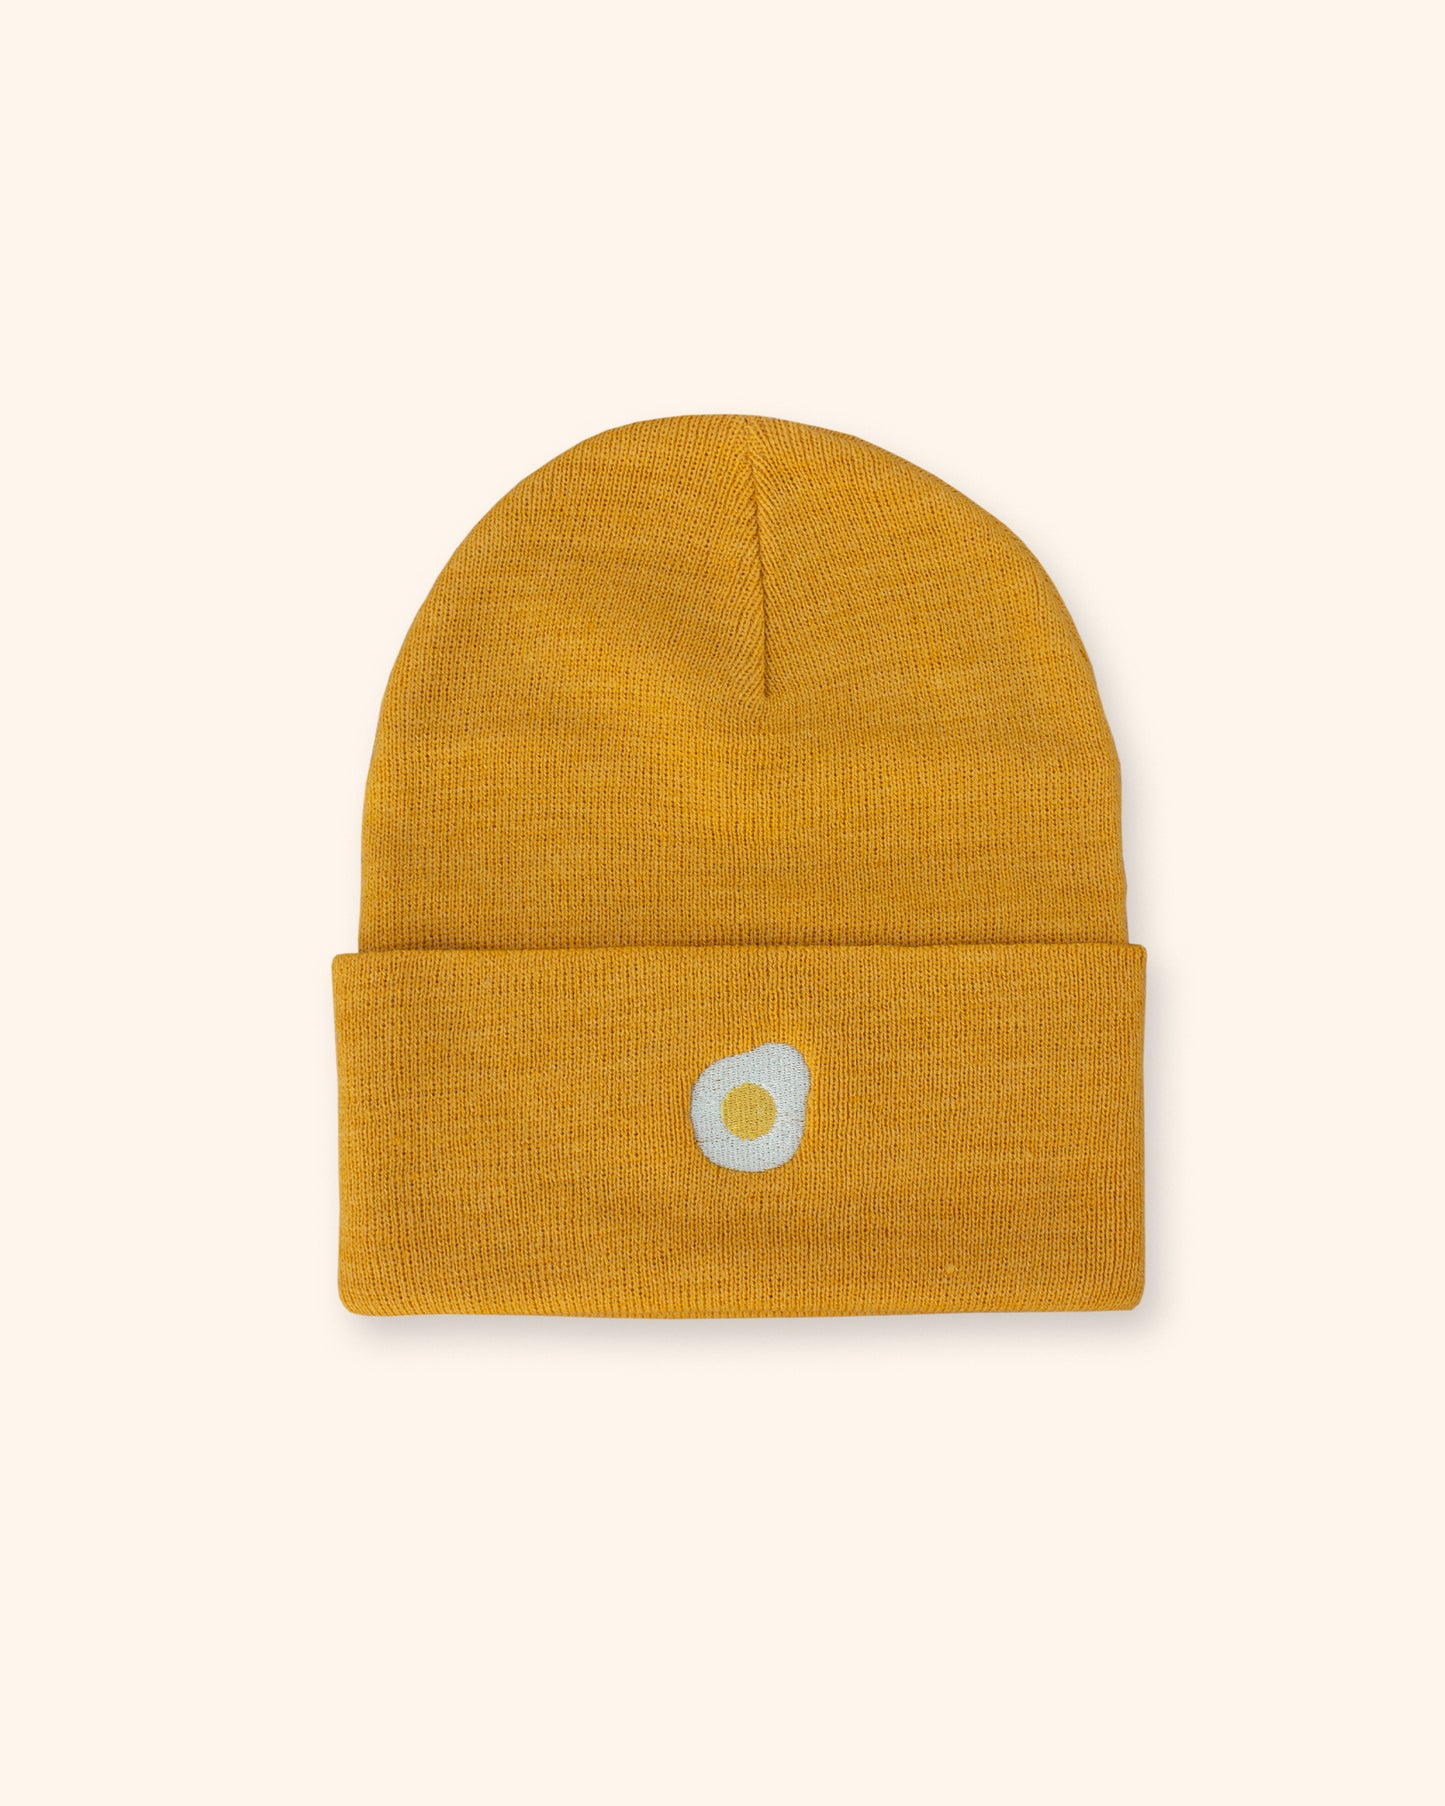 Fried Egg Recycled Beanie